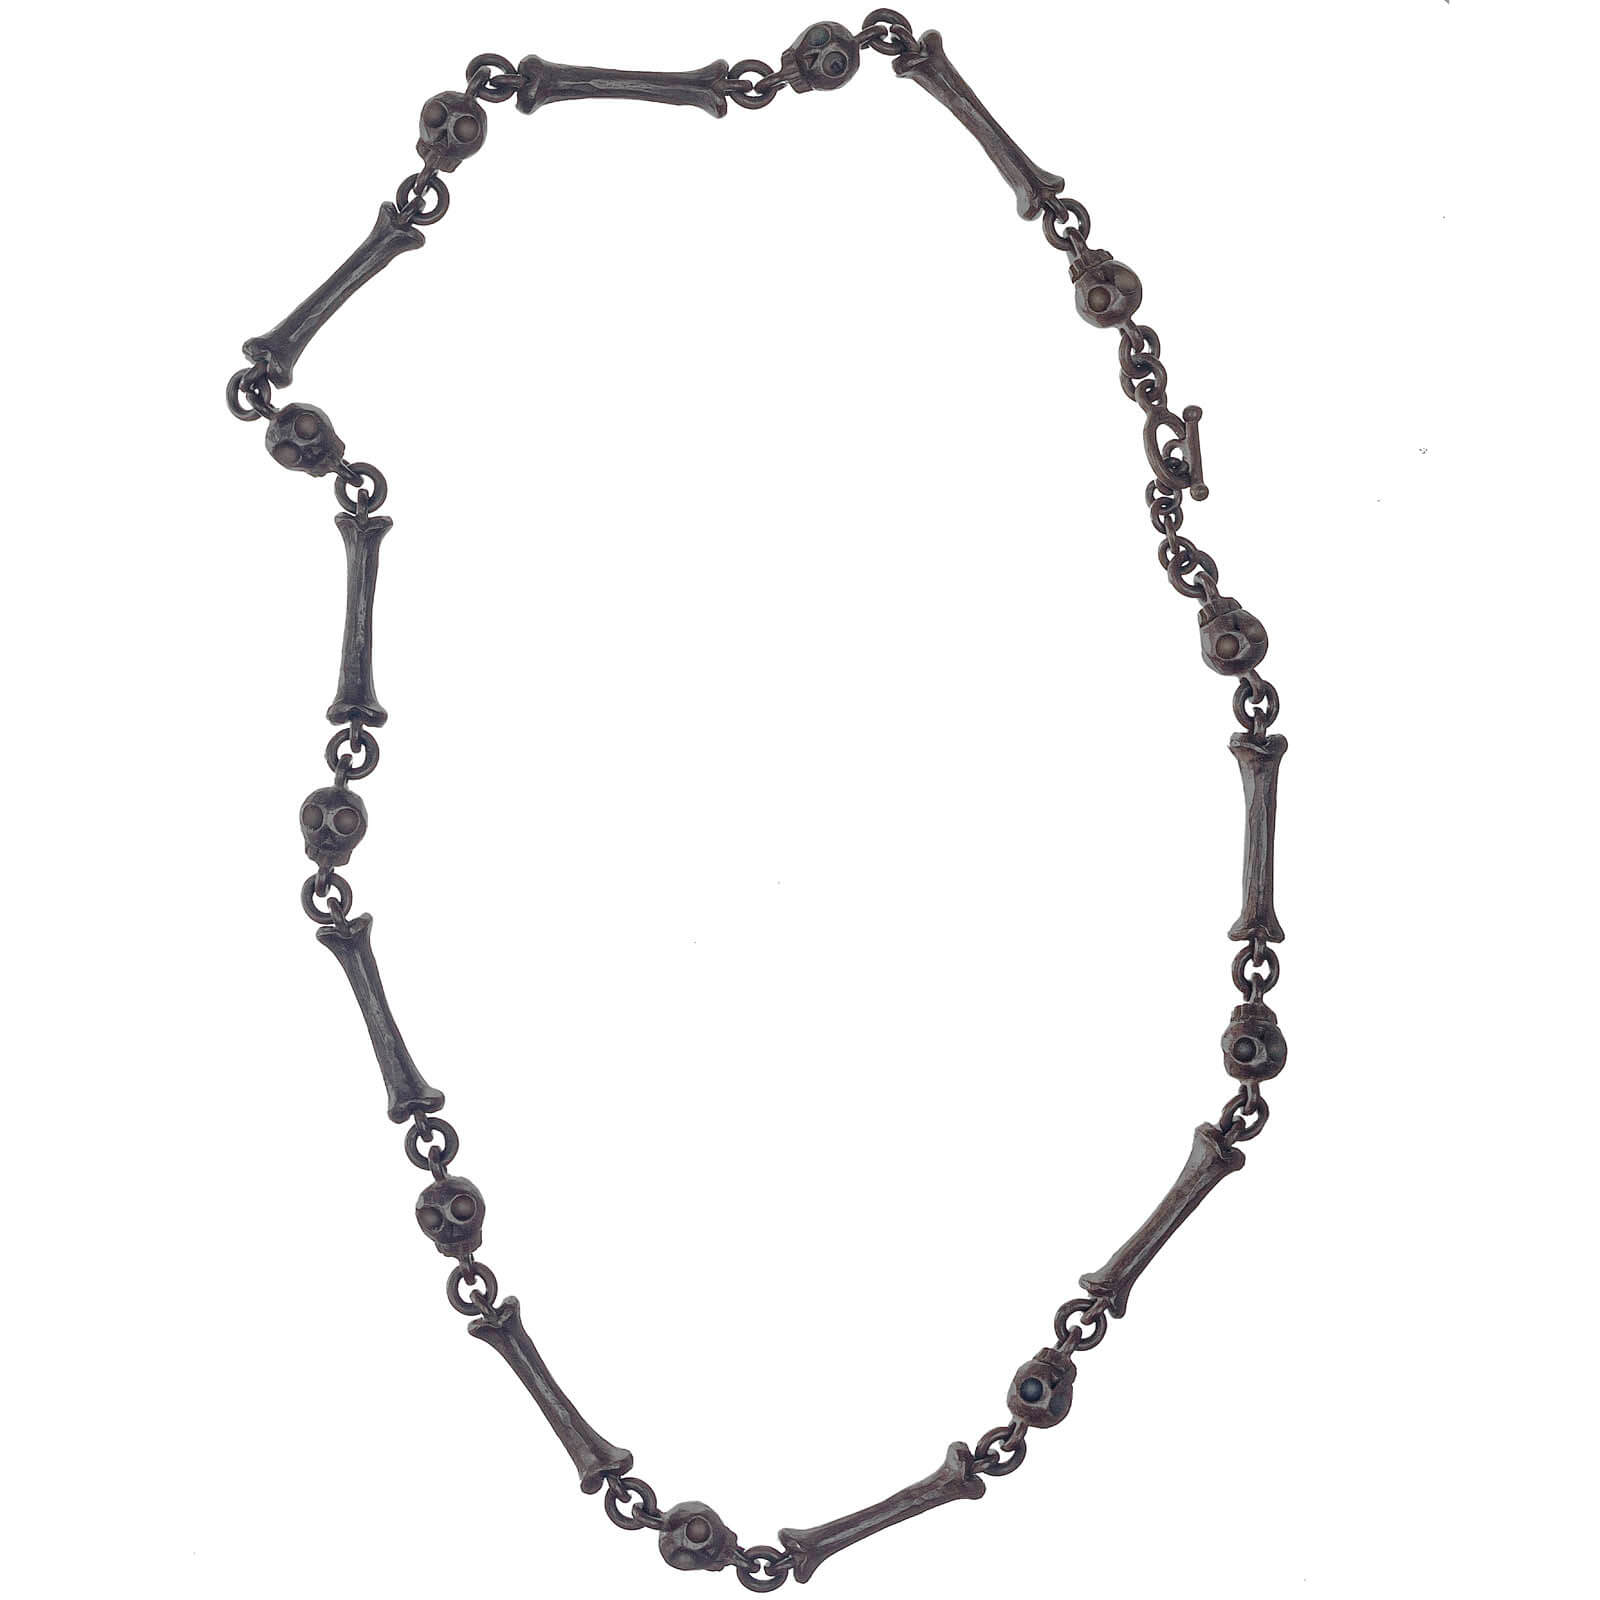 Oxidized Jumbo Pirate Link Chain Necklace